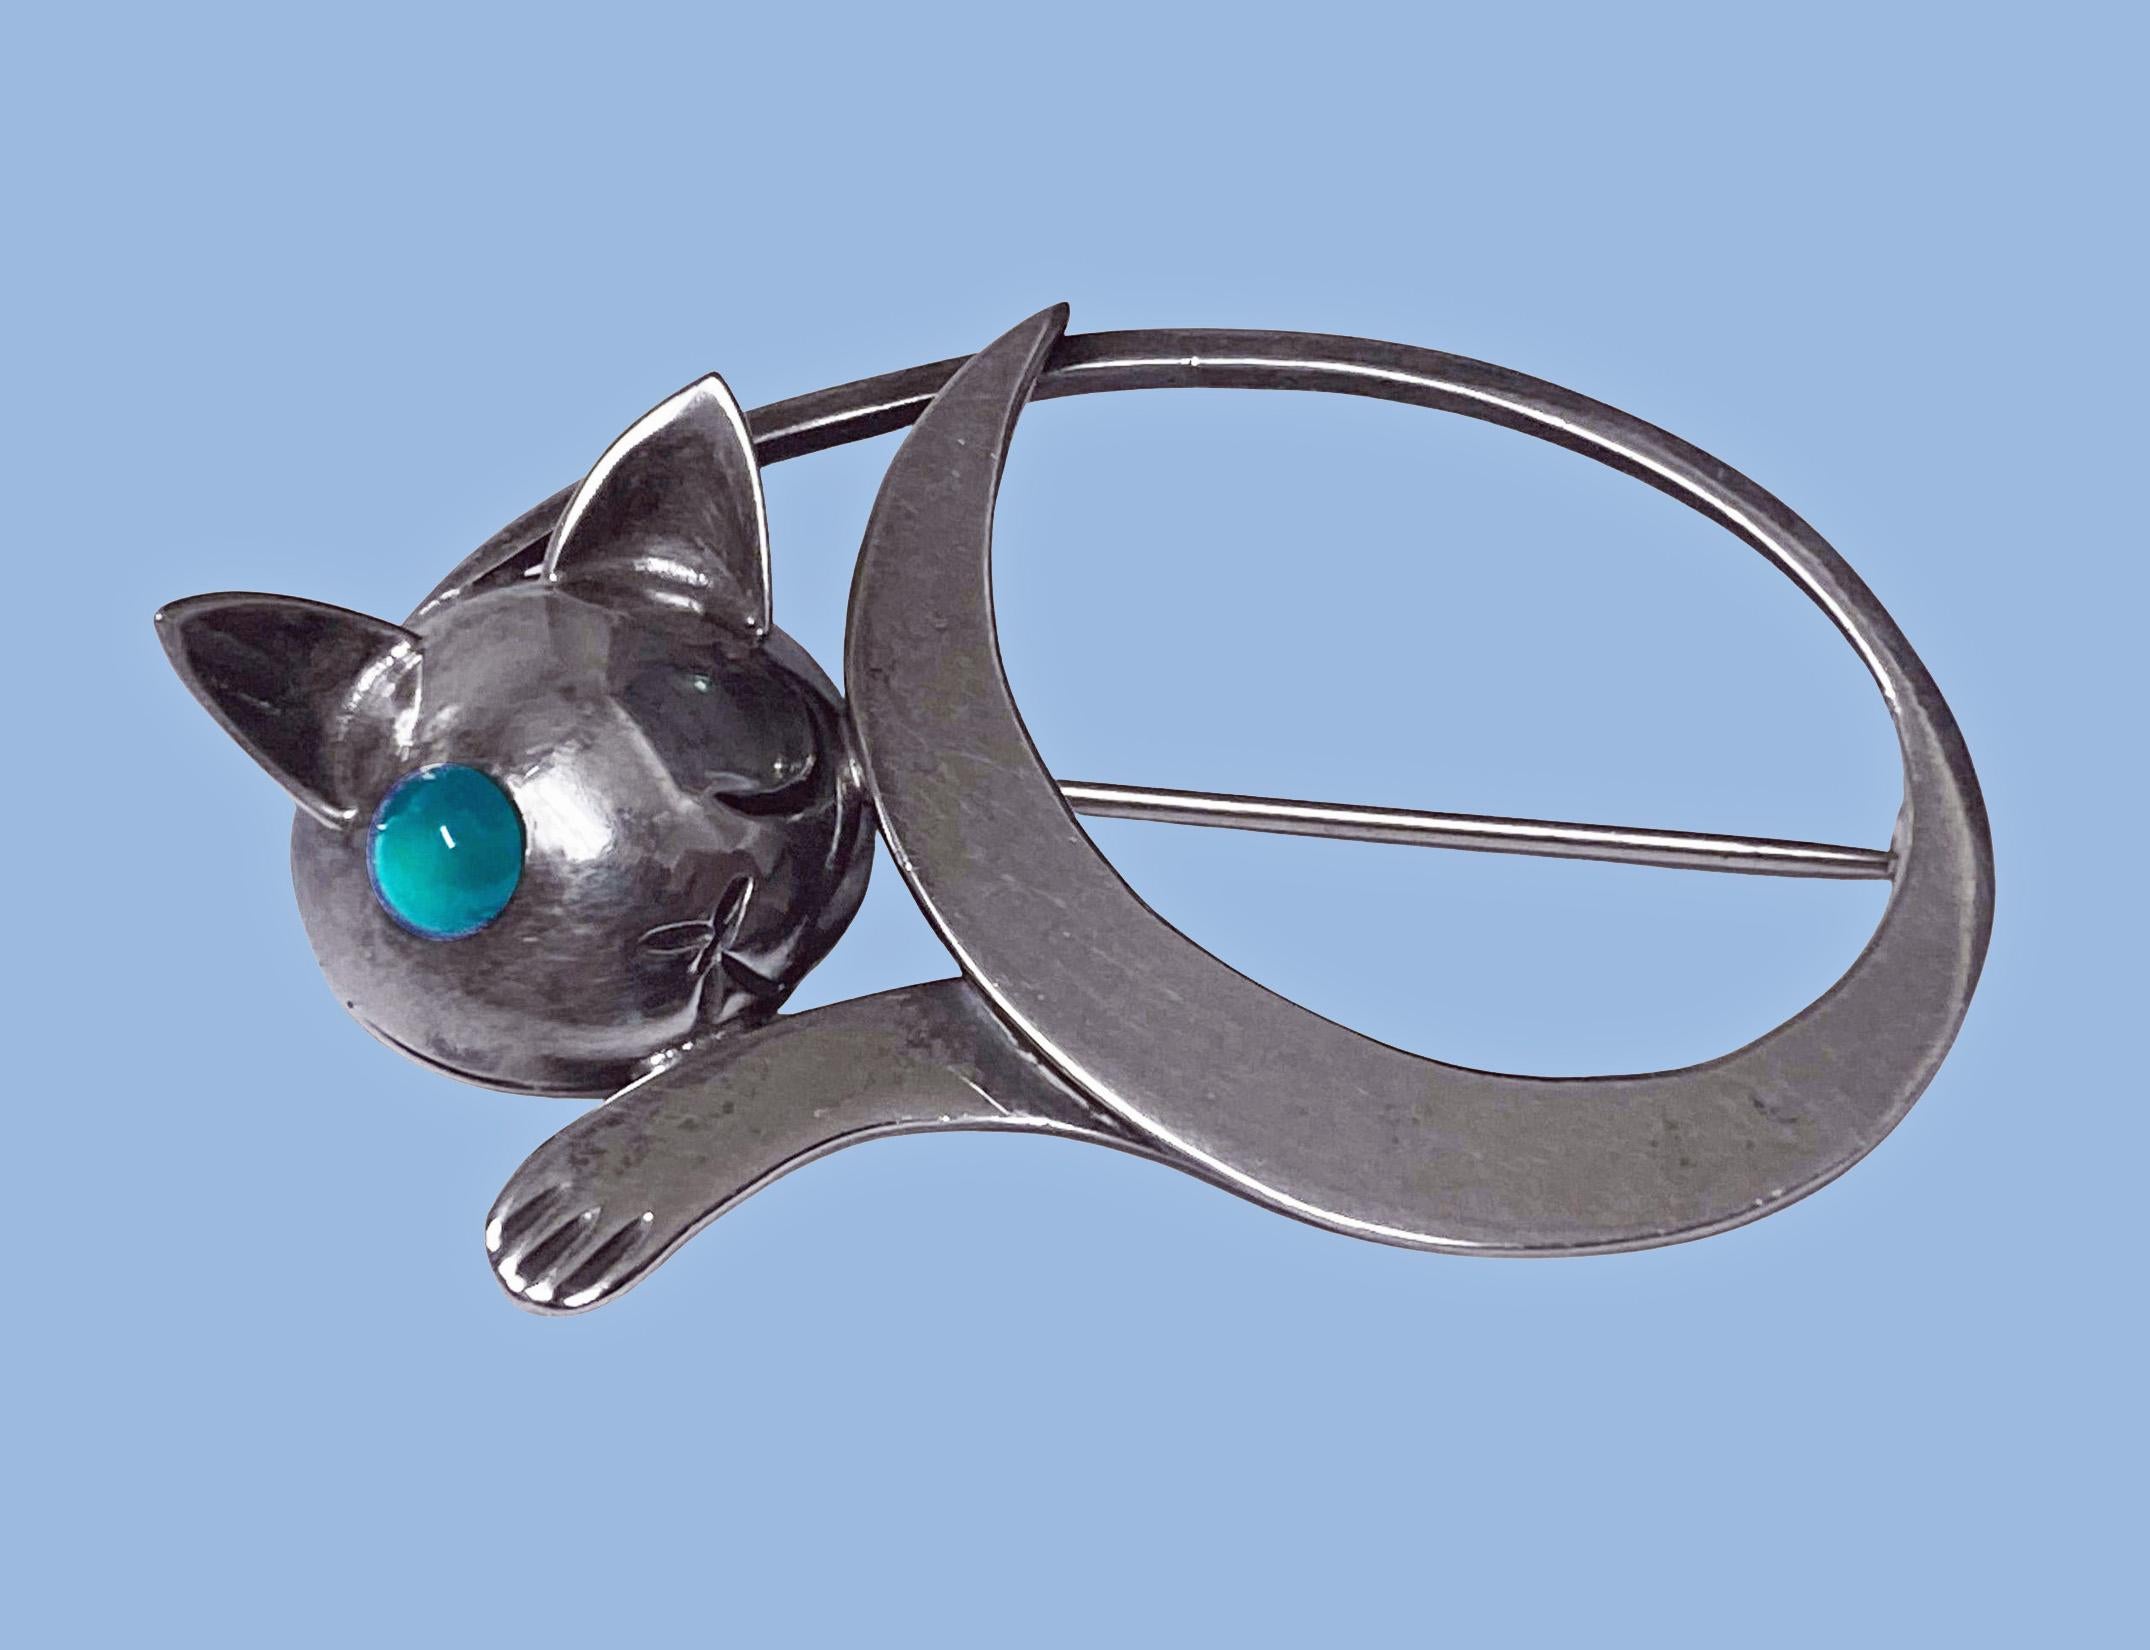 JoPol Sterling reclining Cat Brooch, modernist whimsical design, signed JoPol for Joan Polsdorfer C.1945. Polsdorfer was the first American jewelry designer and maker to work for Georg Jensen, USA. The cat's head brooch, with one eye closed and the